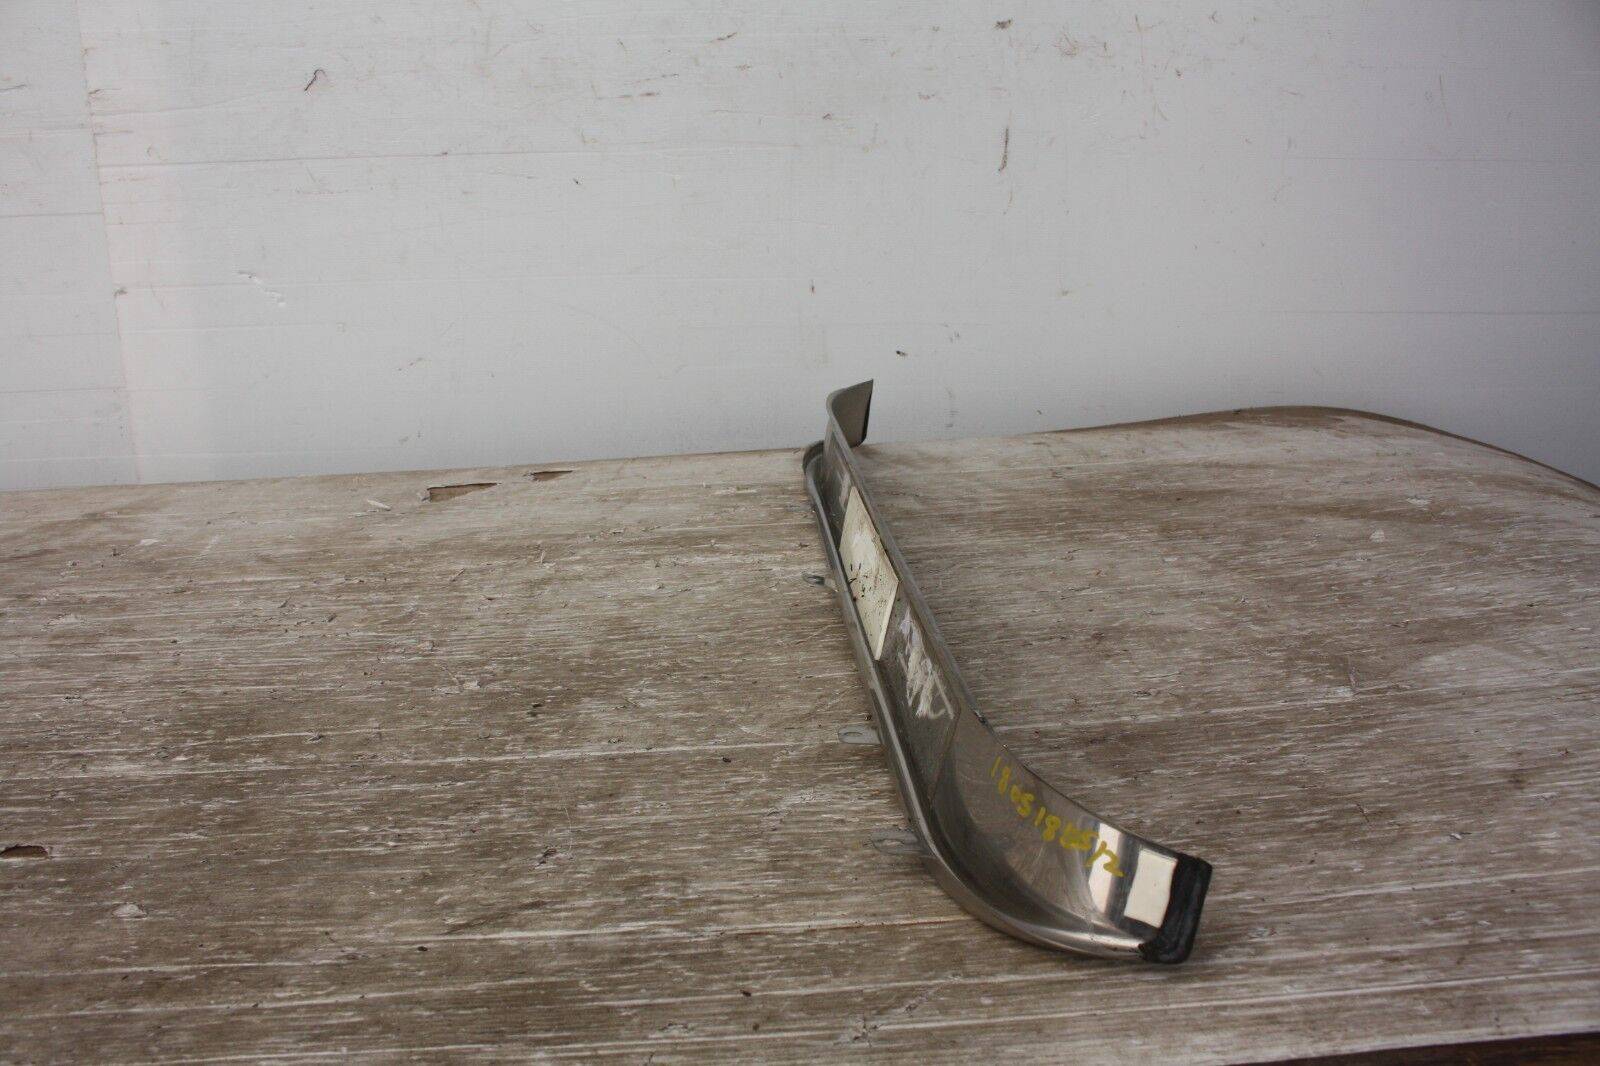 BENTLEY-CONTINENTAL-GT-V8S-DOOR-ENTRY-SILL-STEP-TRIM-2013-TO-2018-175367528501-9